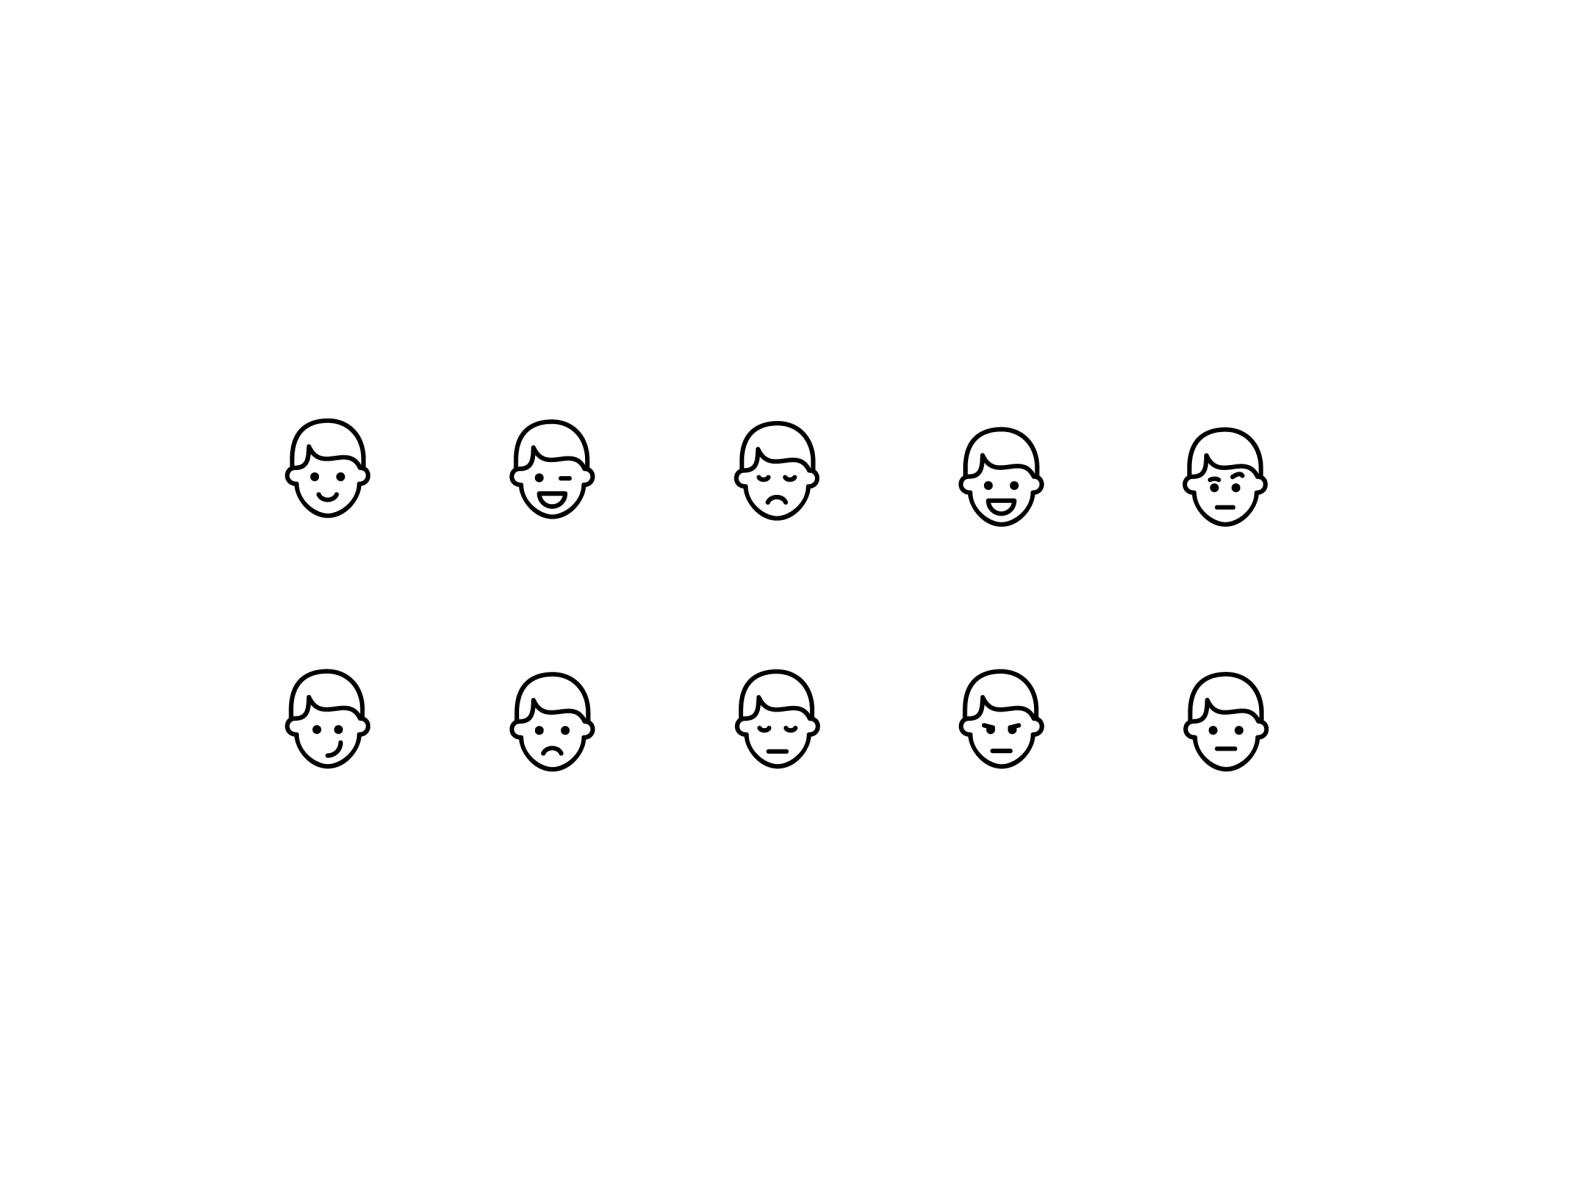 Face emoji icons by Pixotico on Dribbble